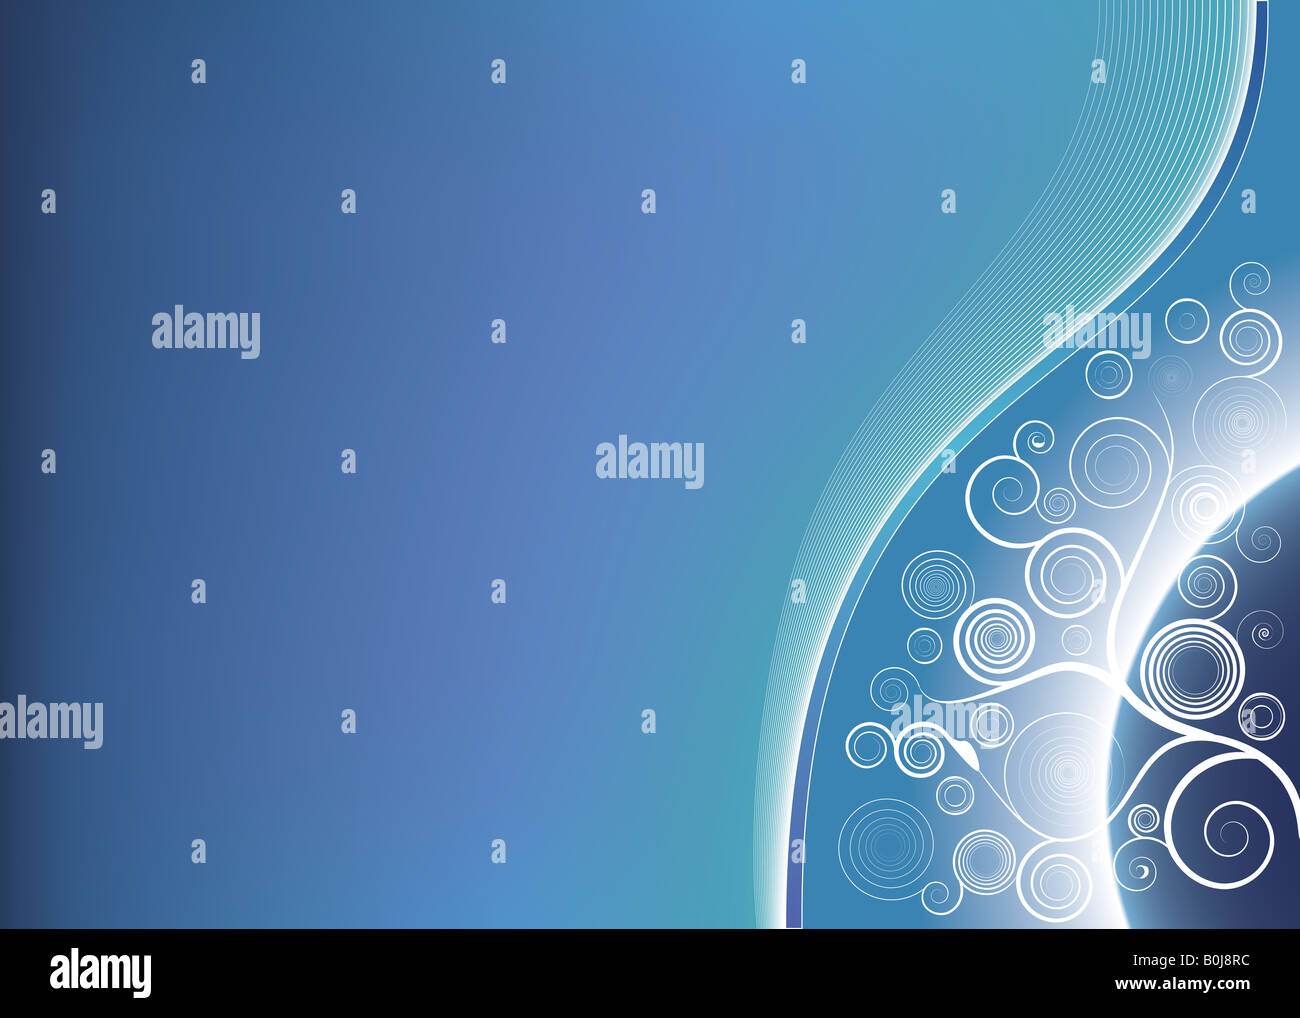 Vector illustration of a gradient mesh planet in the corner with modern floral spirals and lined art style waves Stock Photo